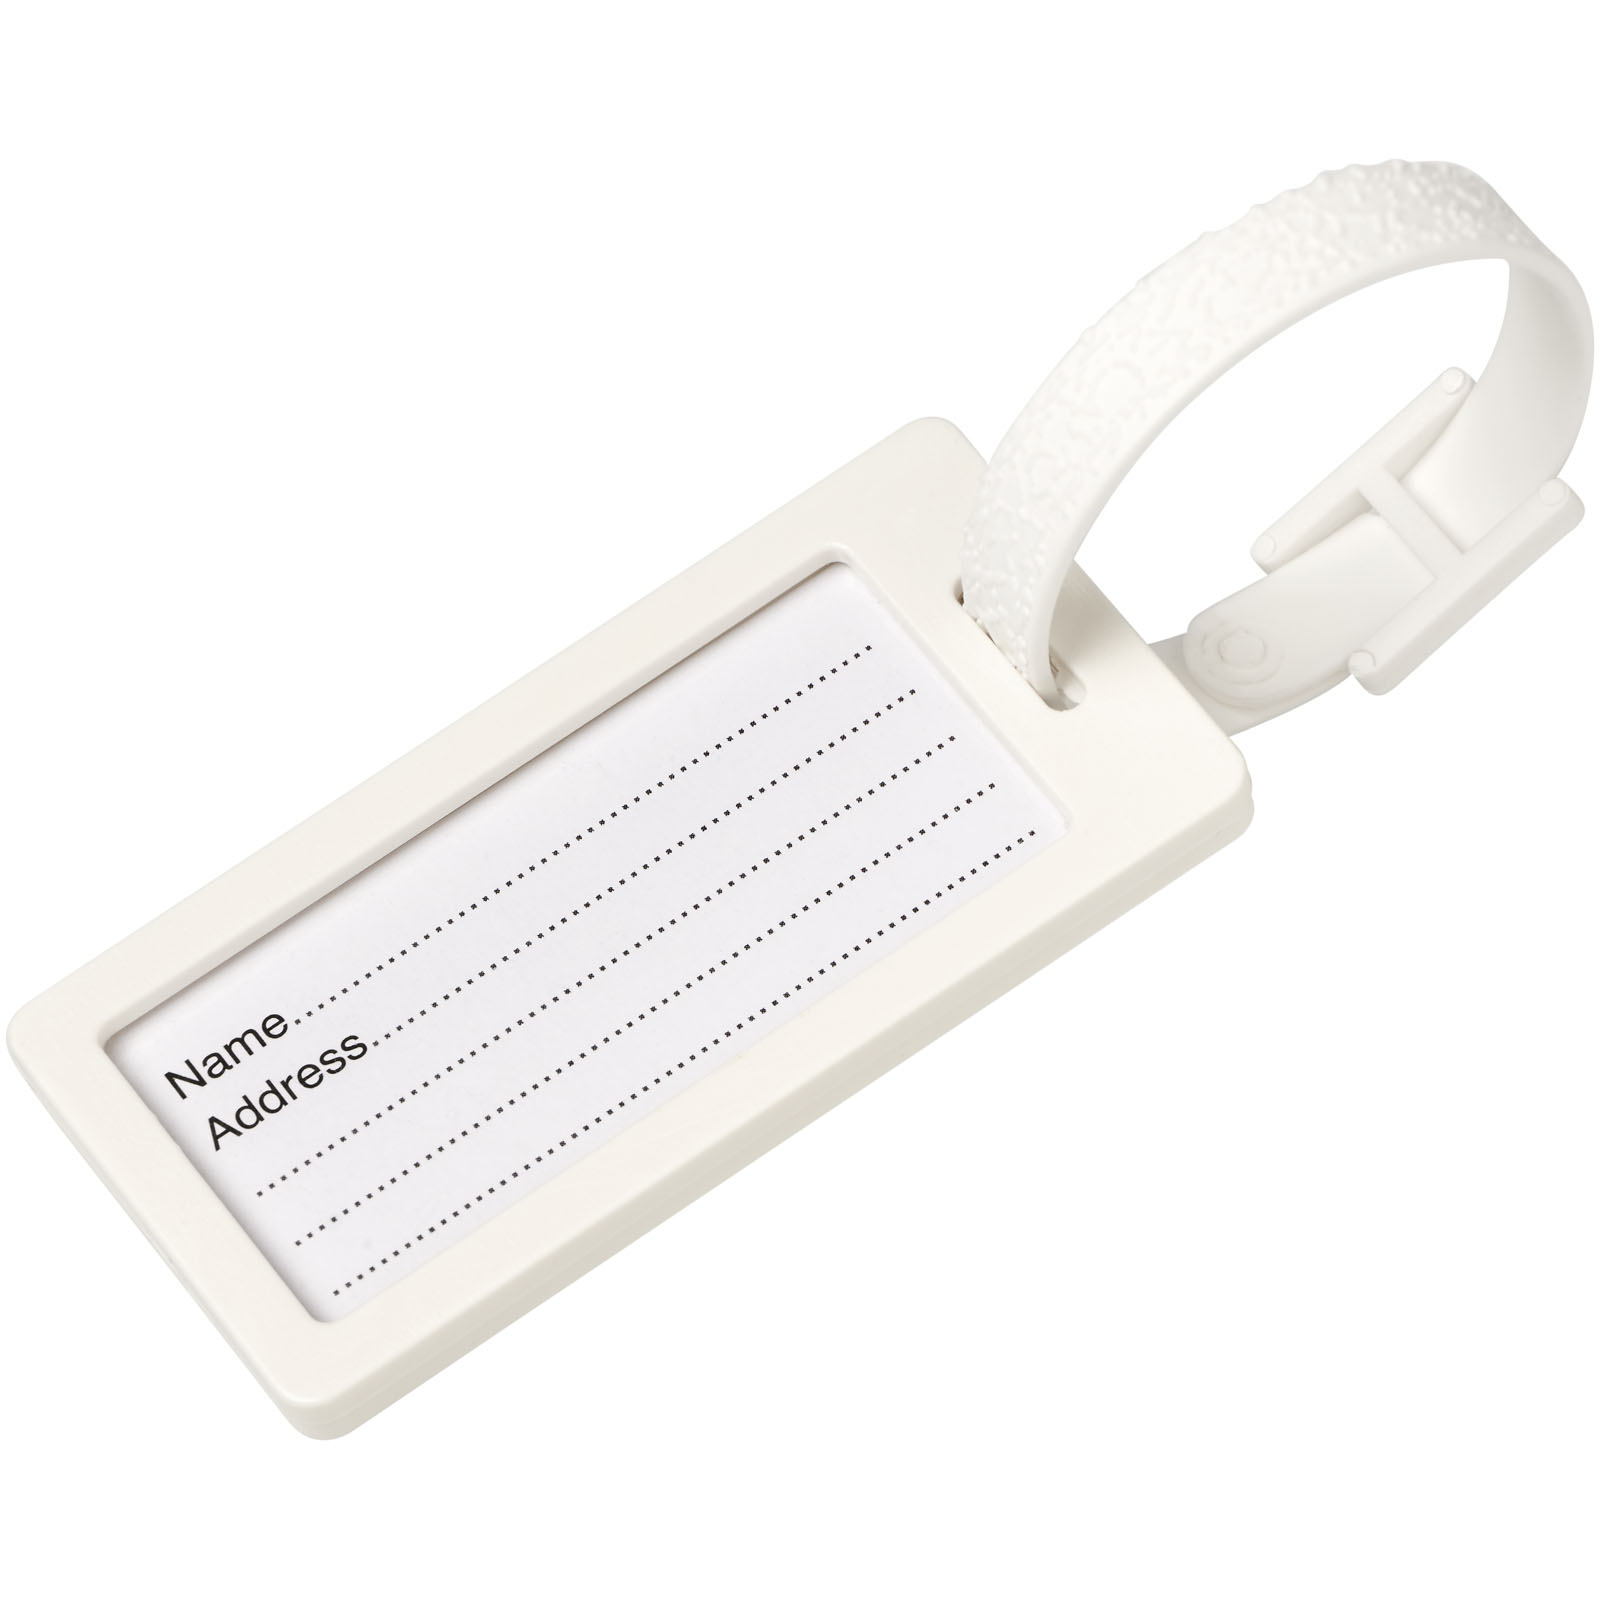 Advertising Travel Accessories - River recycled window luggage tag - 0